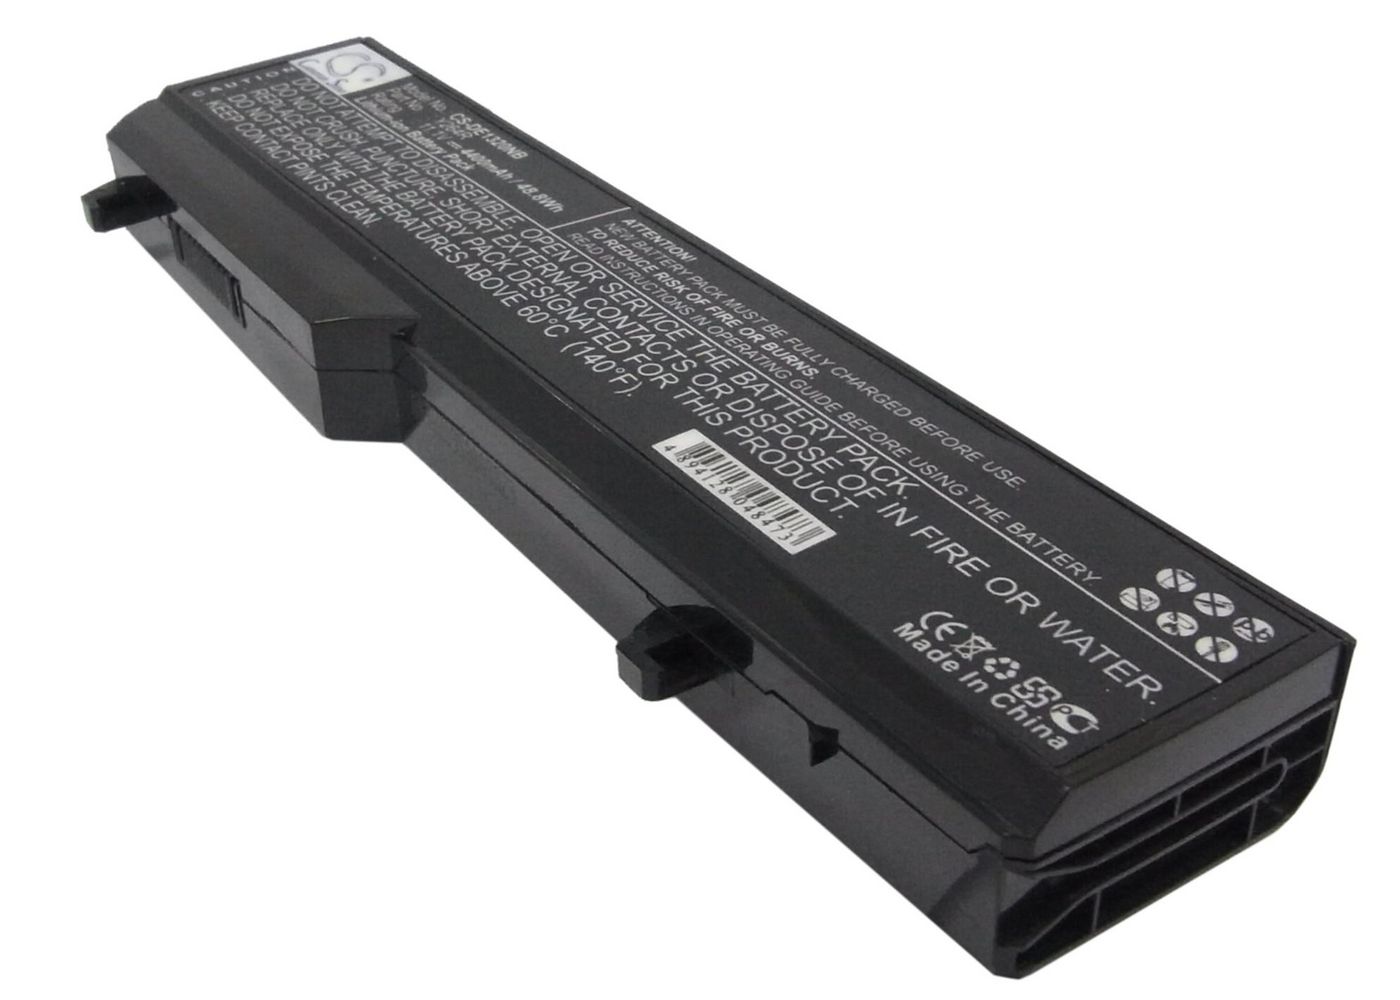 CoreParts MBXDE-BA0102 Laptop Battery for Dell 